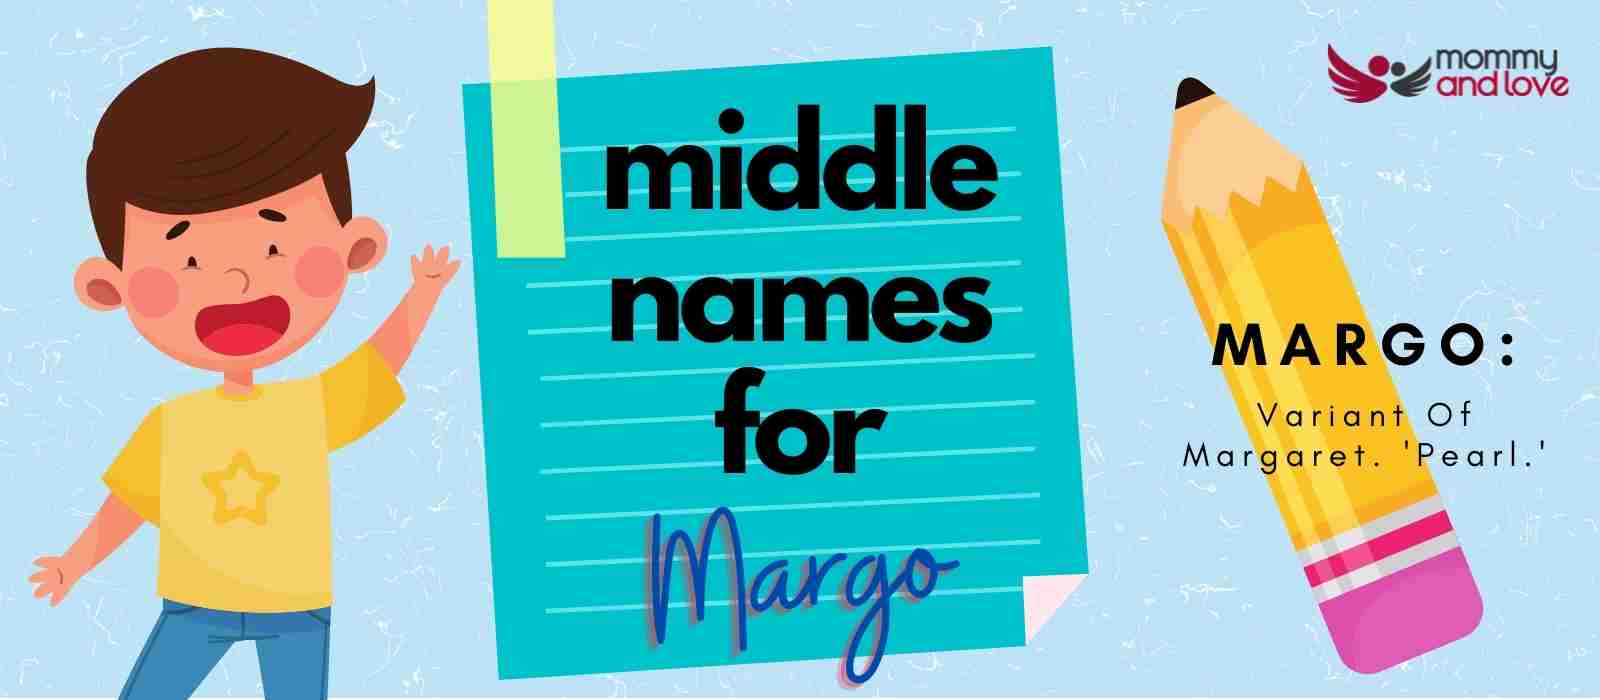 Middle Names for Margo